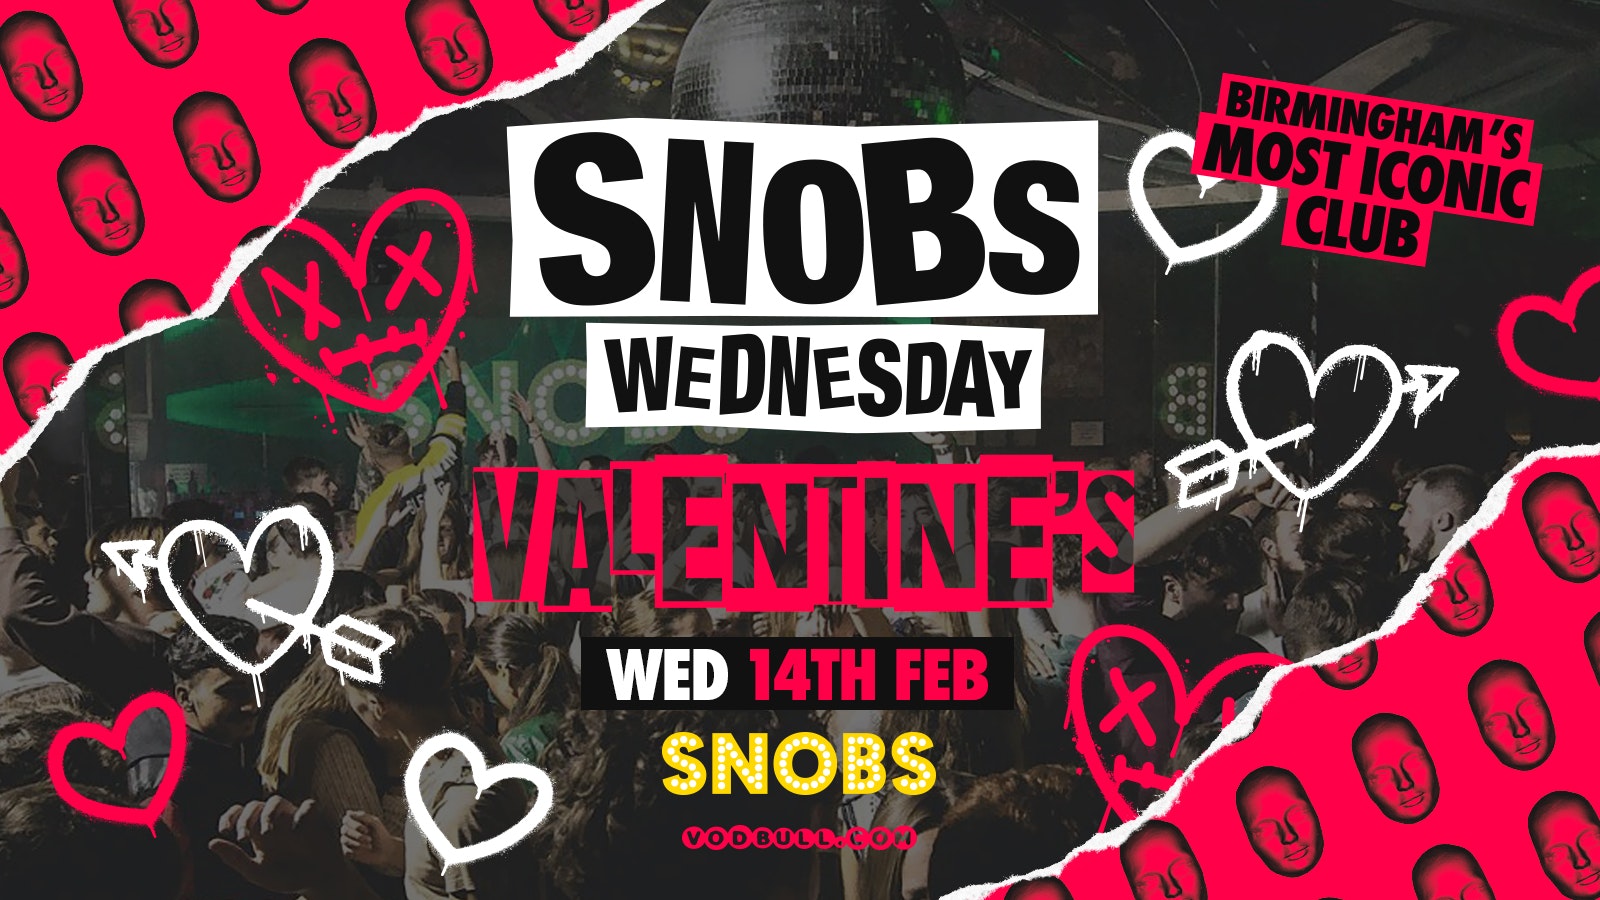 🎶 SNOBS WEDNESDAY!! 🎶🔥[TONIGHT!!] 🔥 Feat TWO ROOMS OF MUSIC & THE SNOBS GAMES ROOM! 14/02